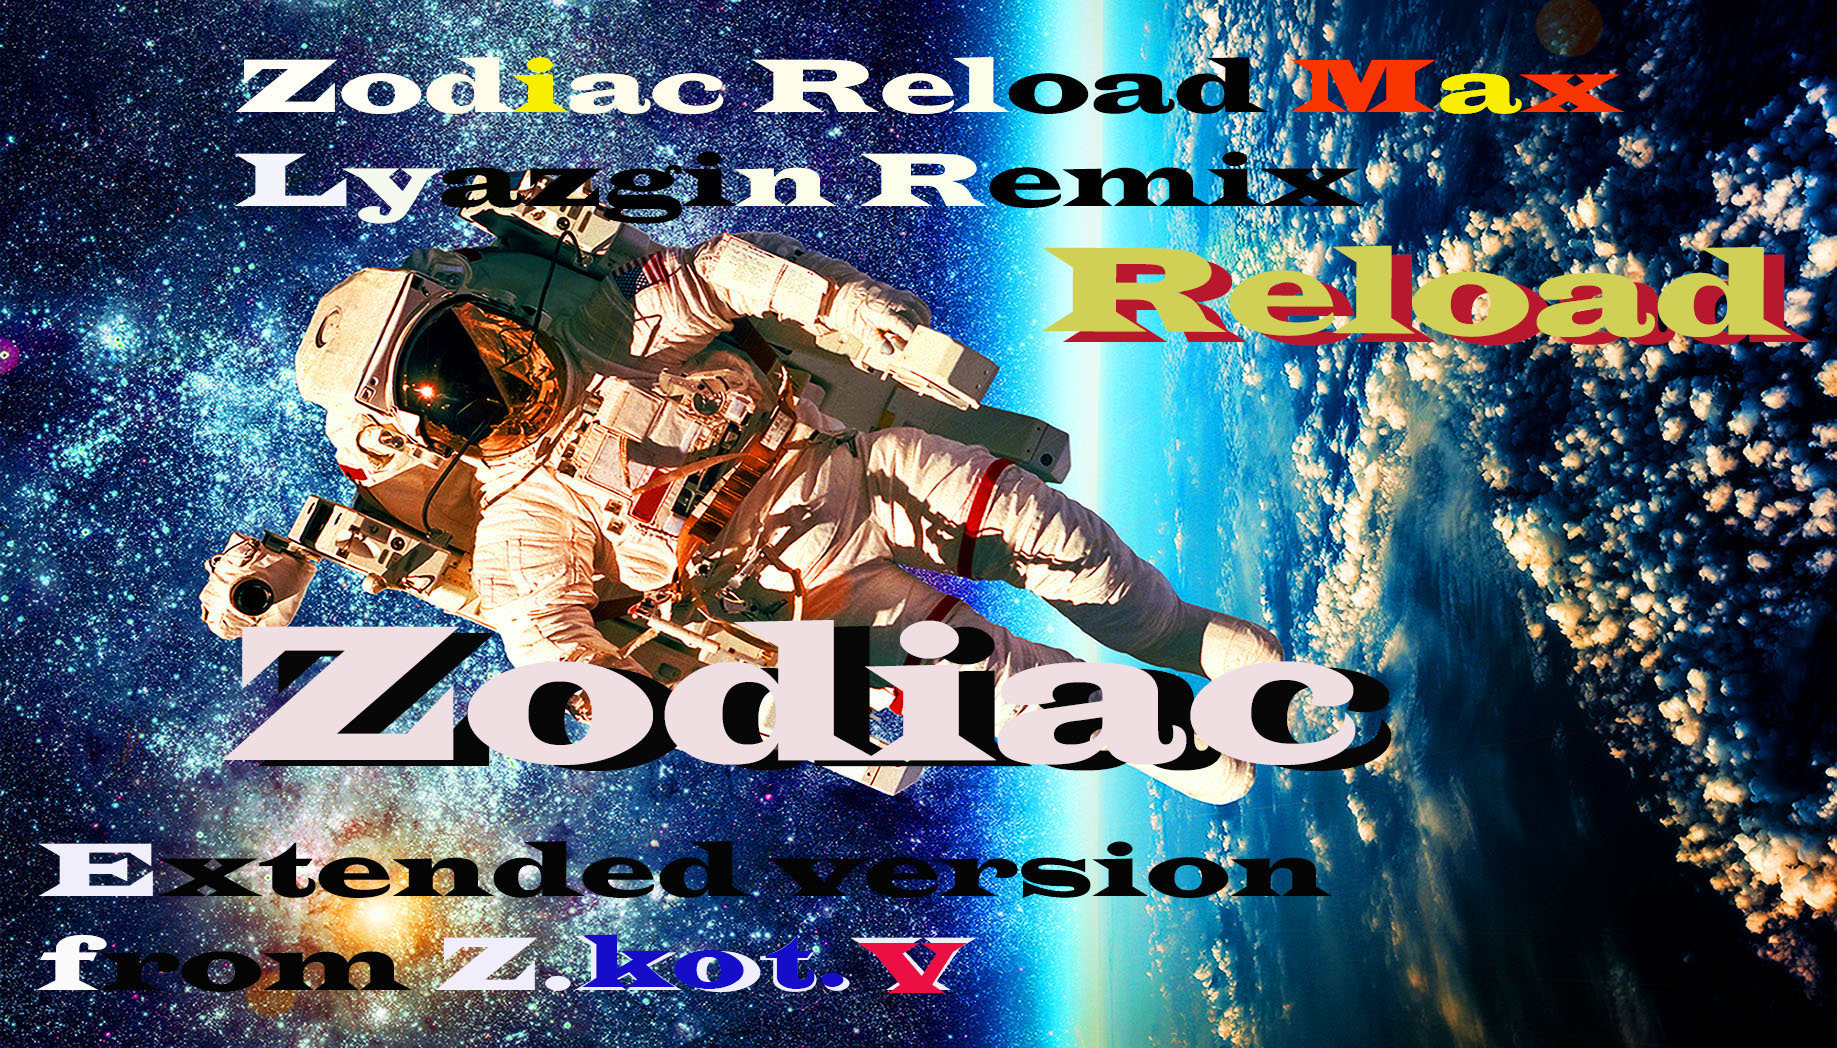 Zodiac Reload Max Lyazgin Remix,Techno House,Nu Disco,Extended version,Техно Хаус,Ню Диско, #22 .mp4